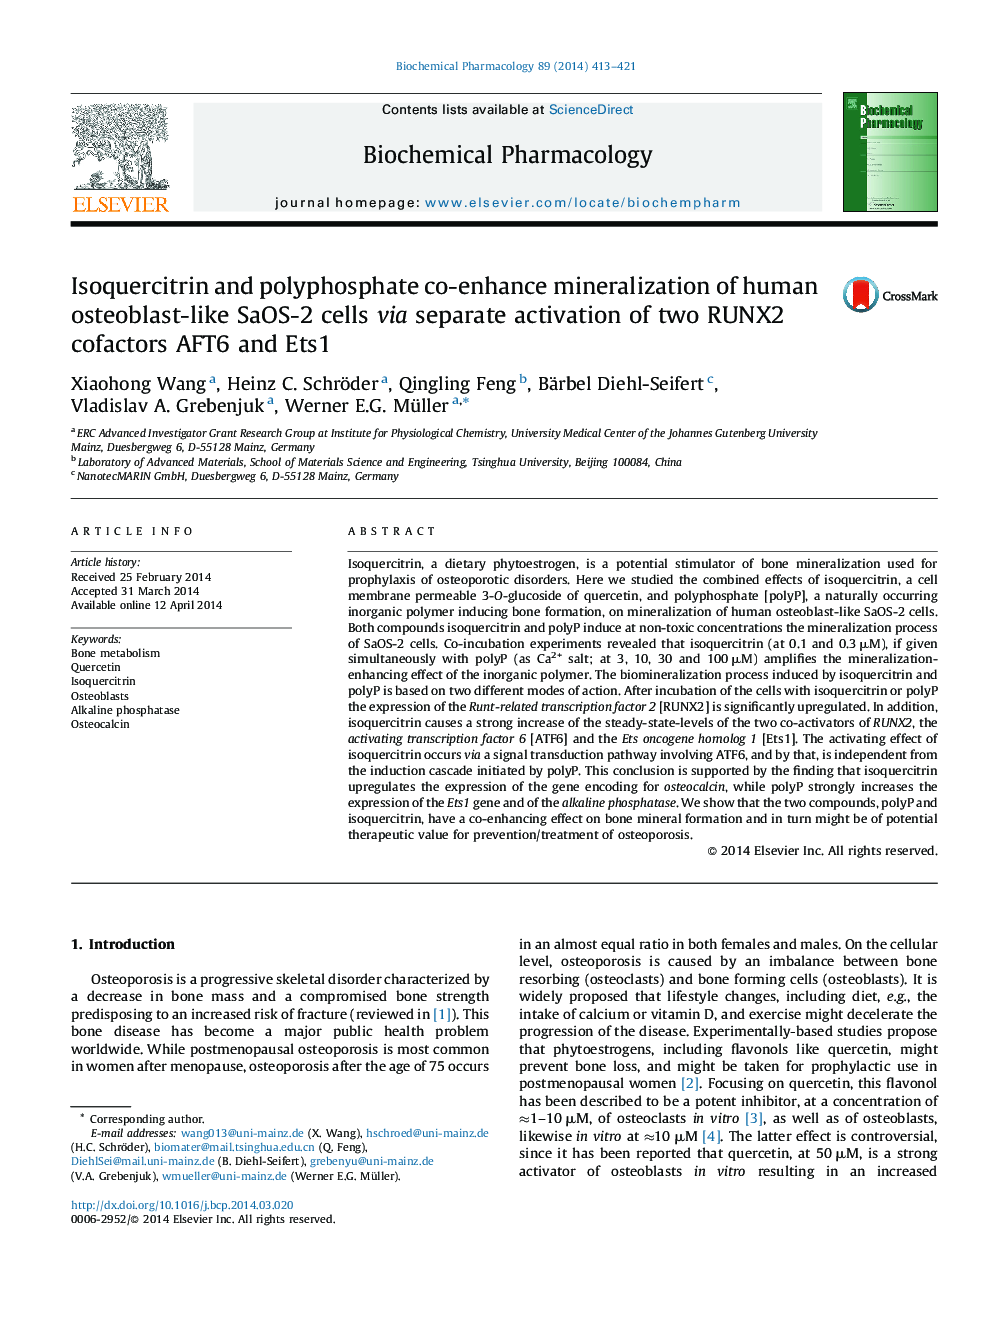 Isoquercitrin and polyphosphate co-enhance mineralization of human osteoblast-like SaOS-2 cells via separate activation of two RUNX2 cofactors AFT6 and Ets1